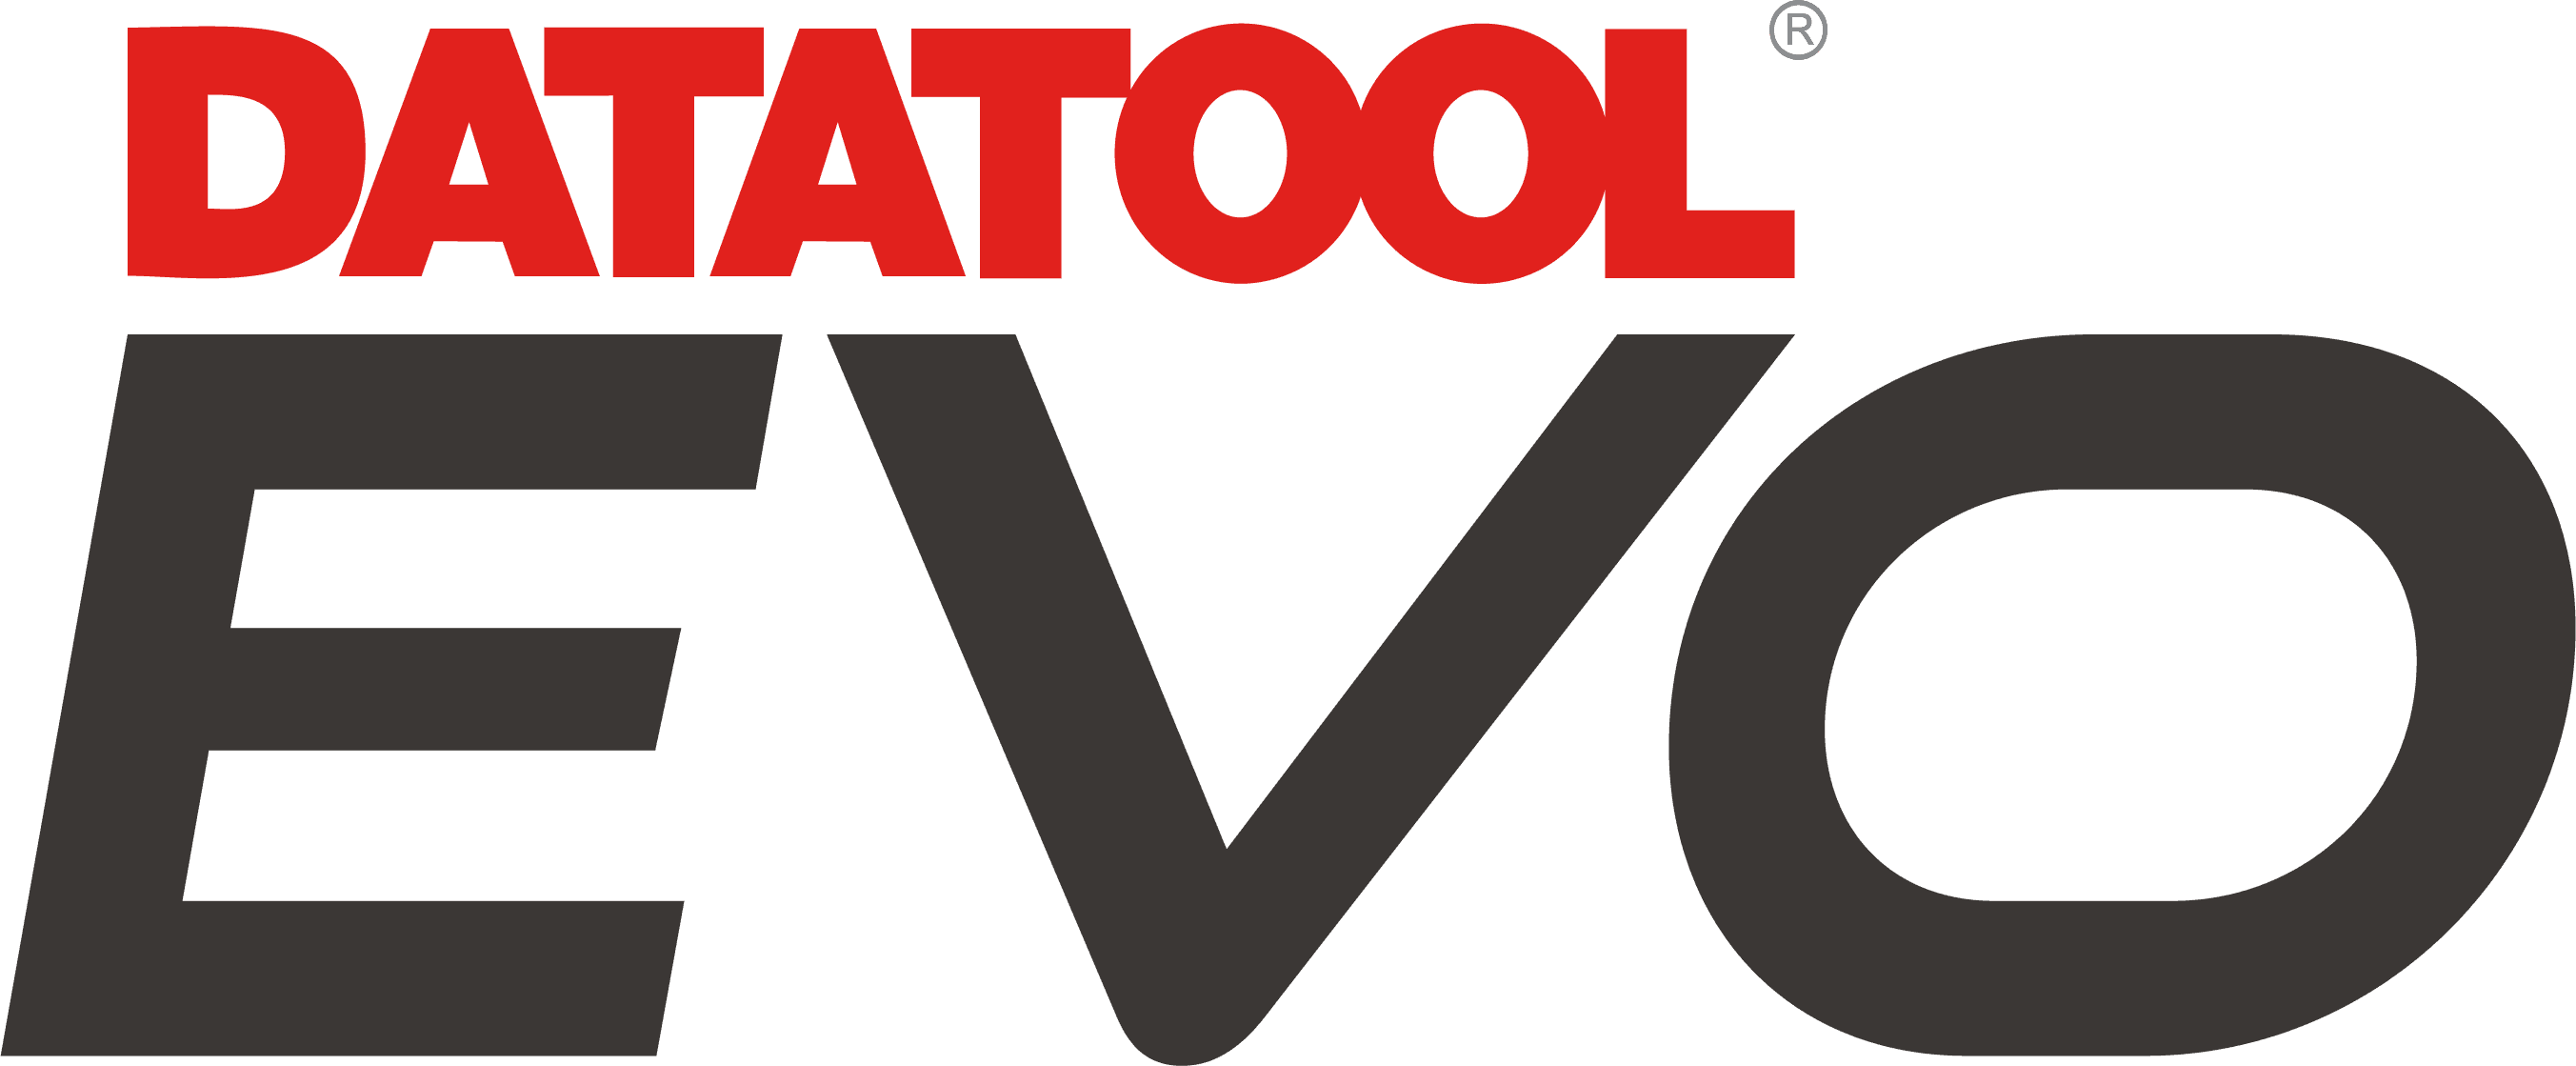 Datatool Stealth, Motorcycle Tracking, Motorcycle Tracker, Motorcycle Insurance